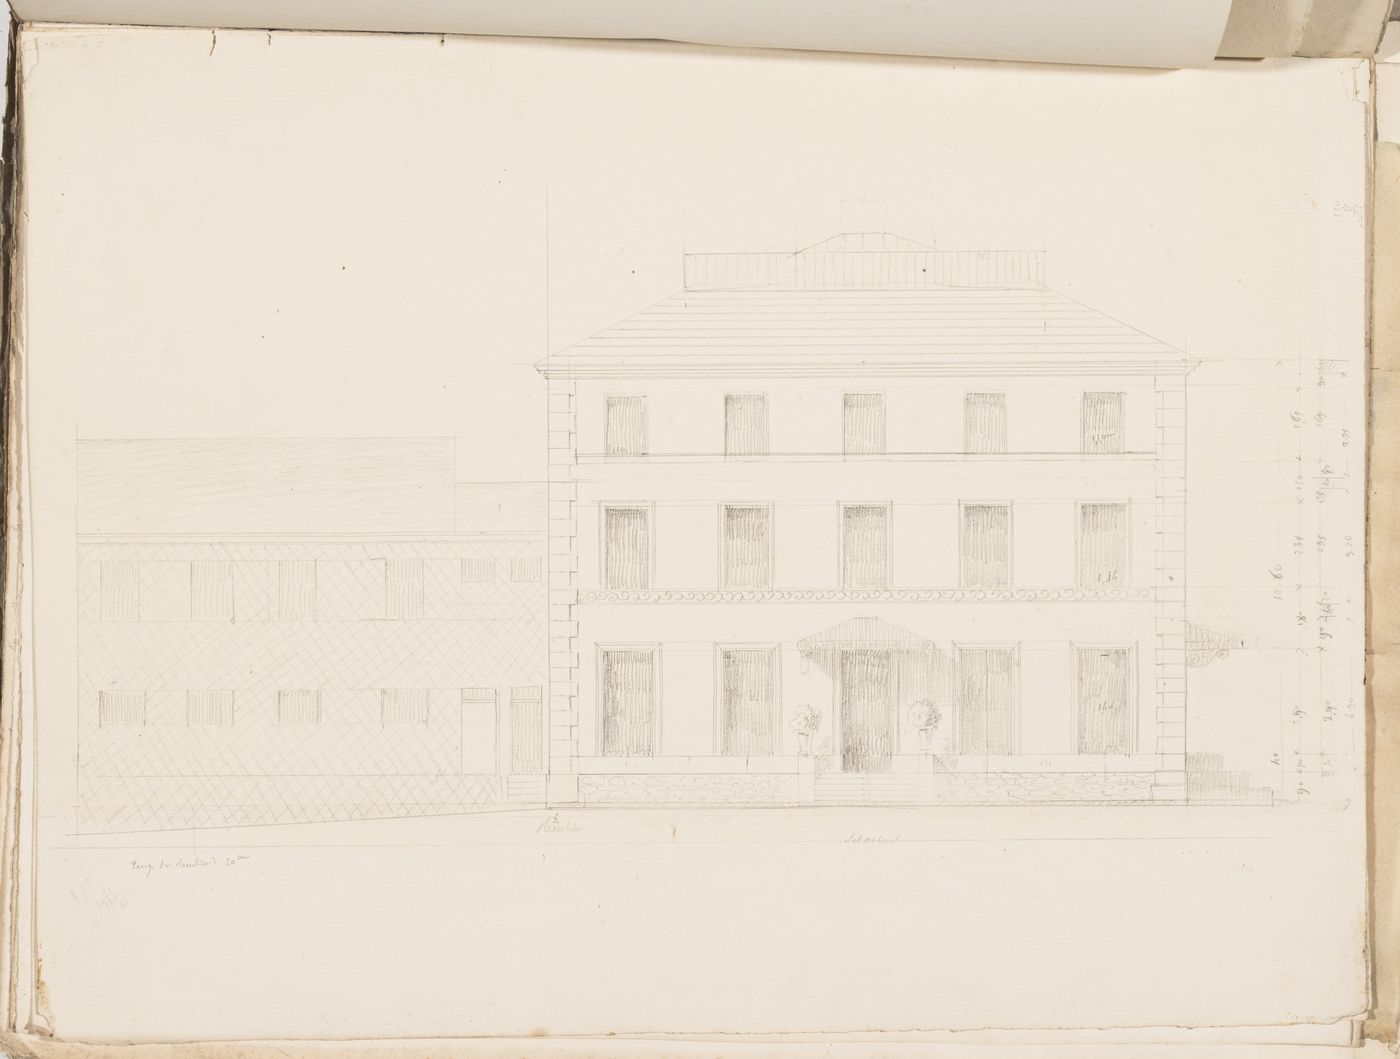 Project no. 8 for a country house for comte Treilhard: Elevation; verso: Project no. 8 for a country house for comte Treilhard: Cross section